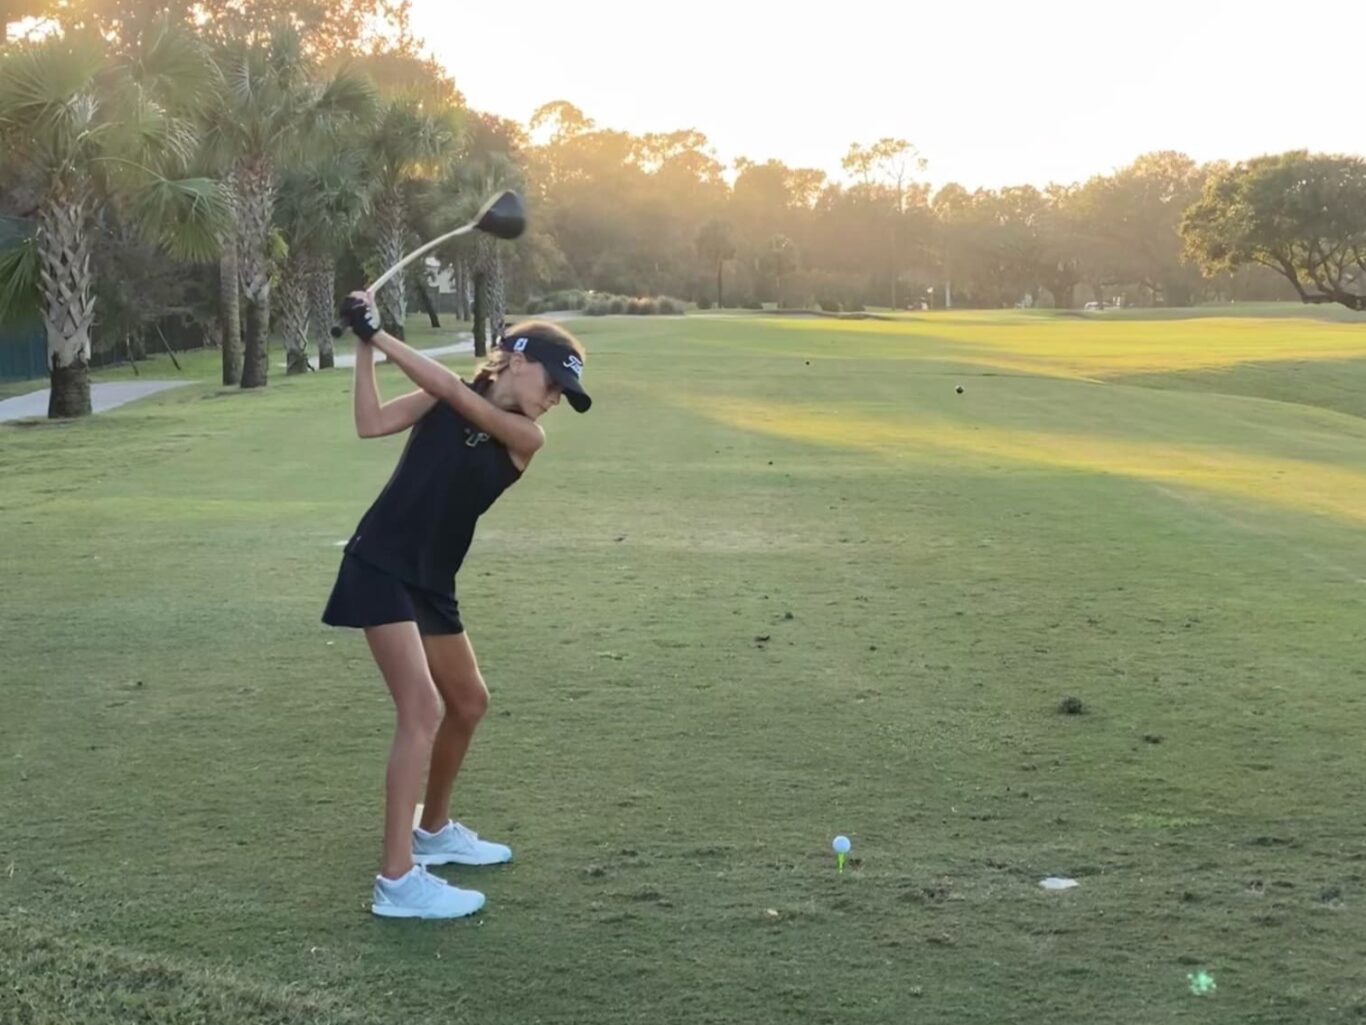 A girl swinging a golf club at sunset.